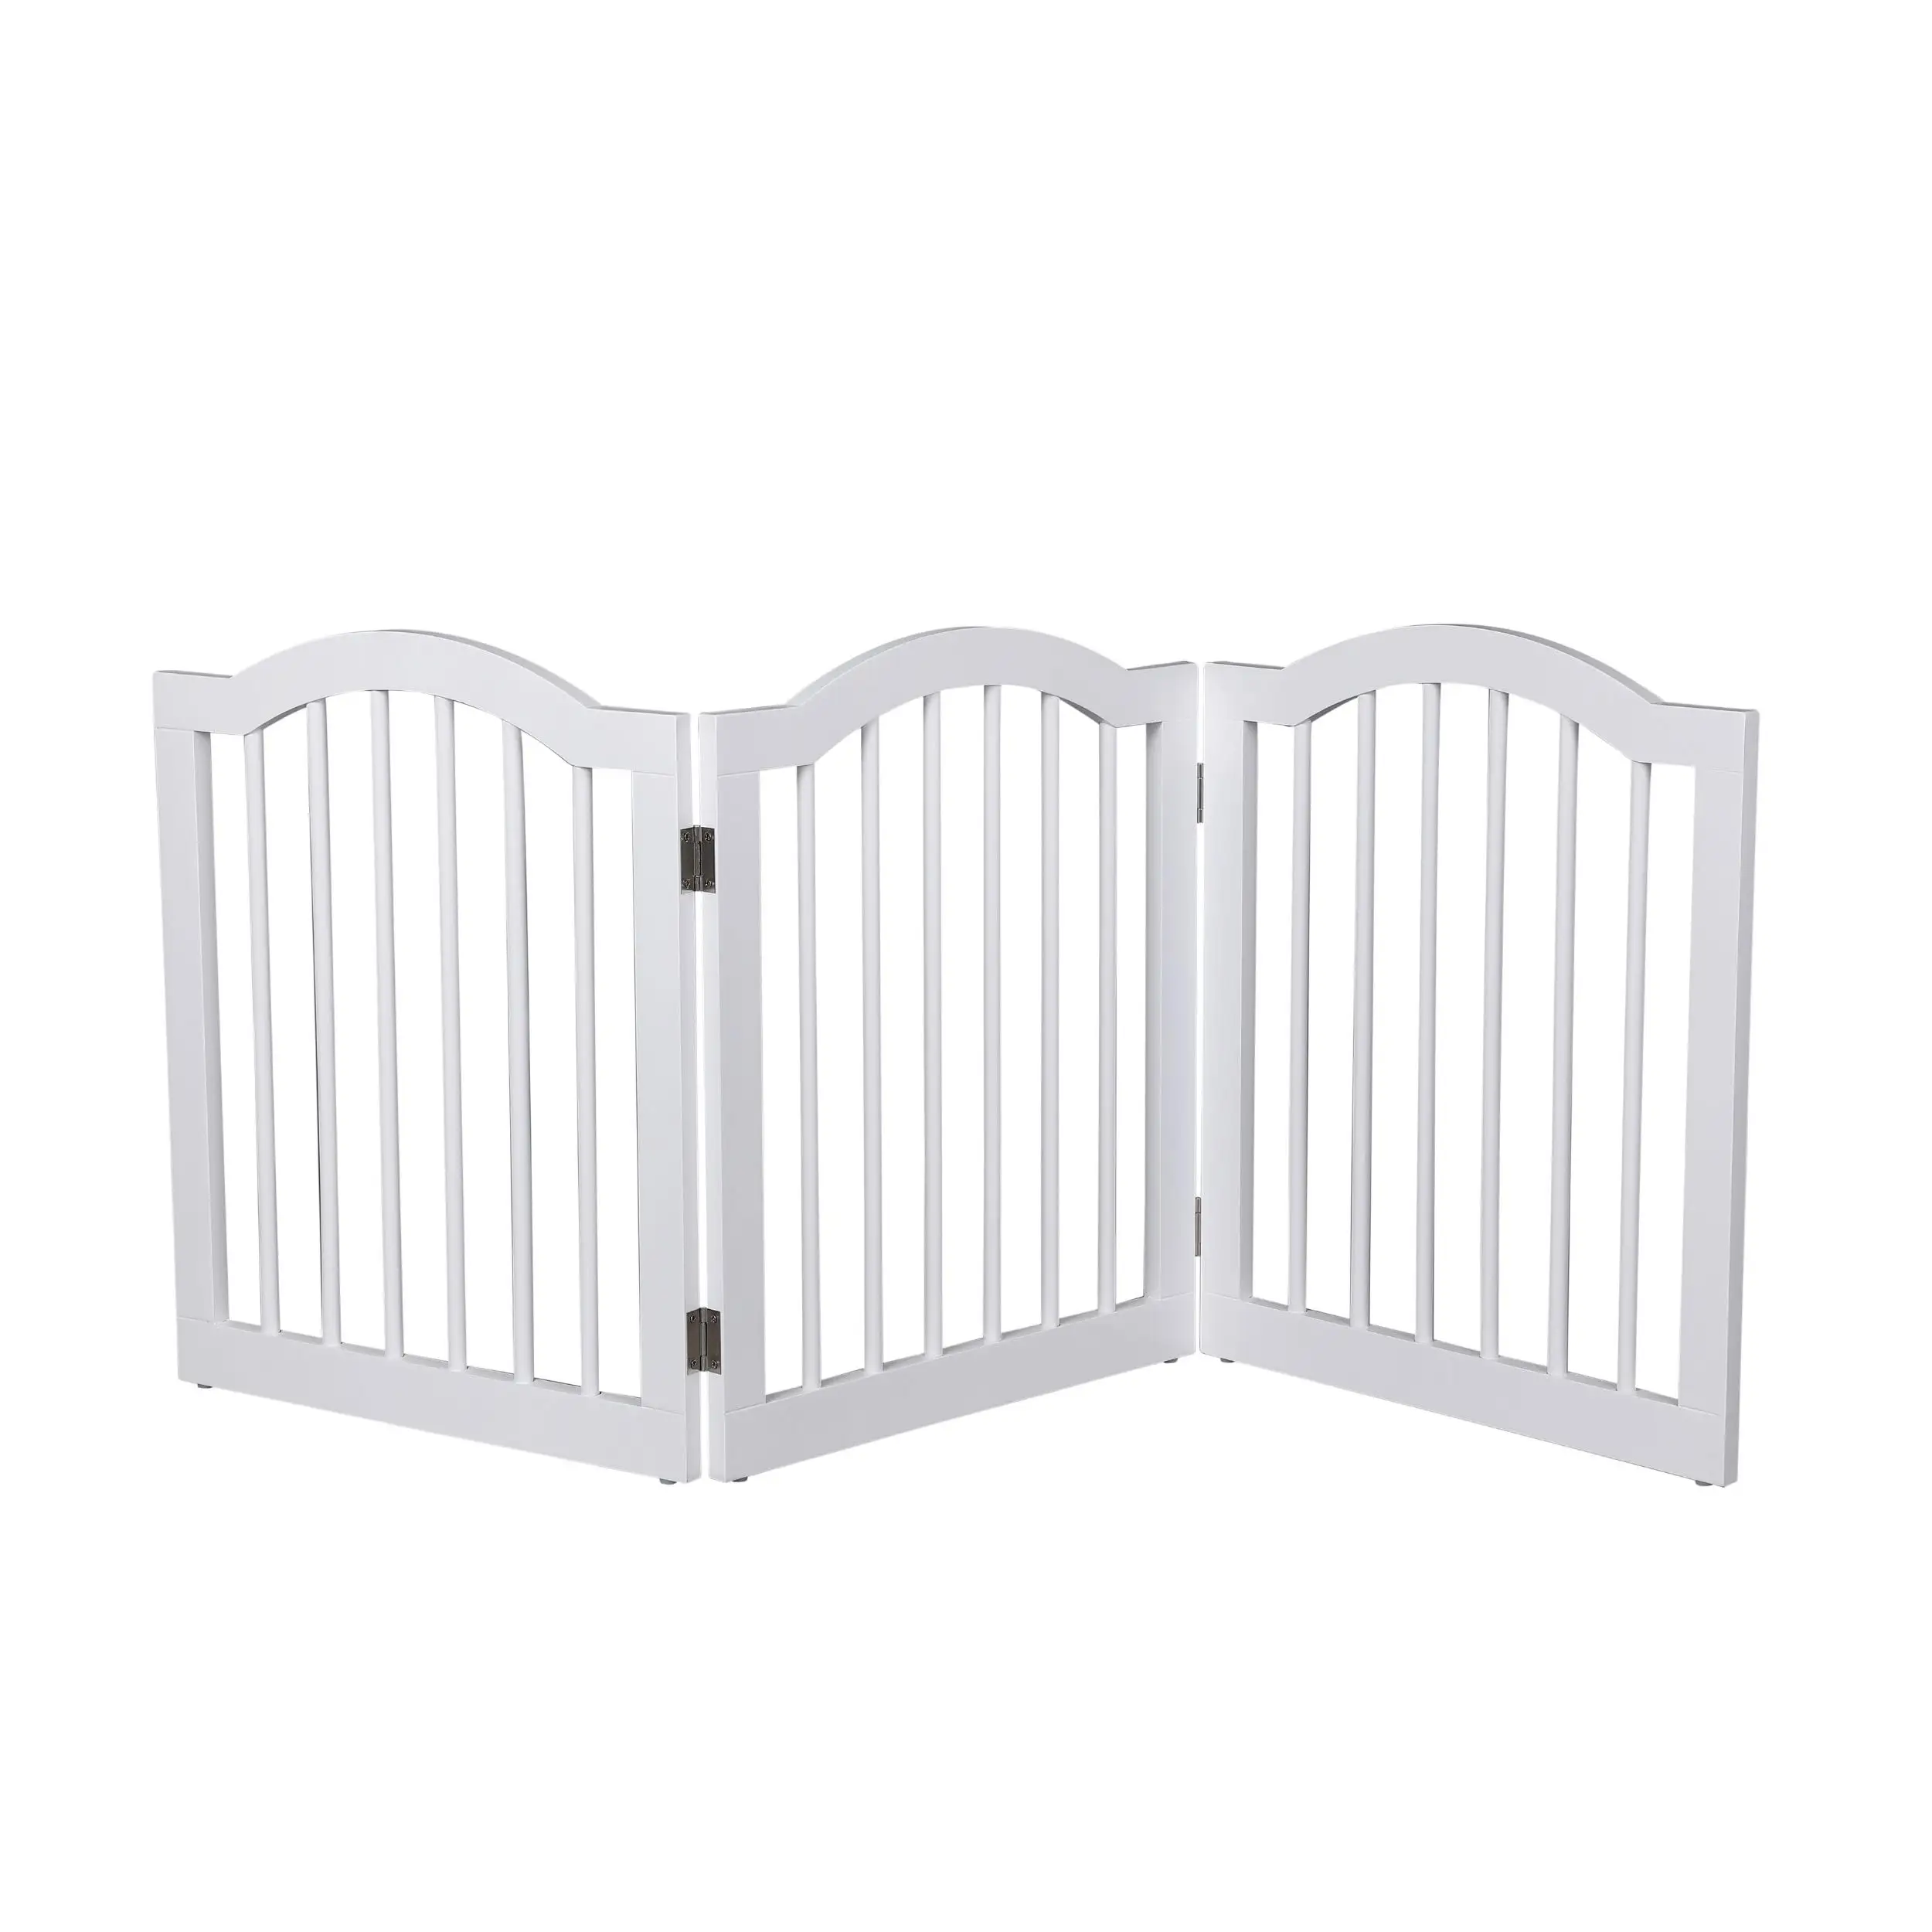 Best Price Foldable Wooden Dog Gate Pet Gates Outdoor Indoor Dog Kennel with Support Feet for All Sizes Dog